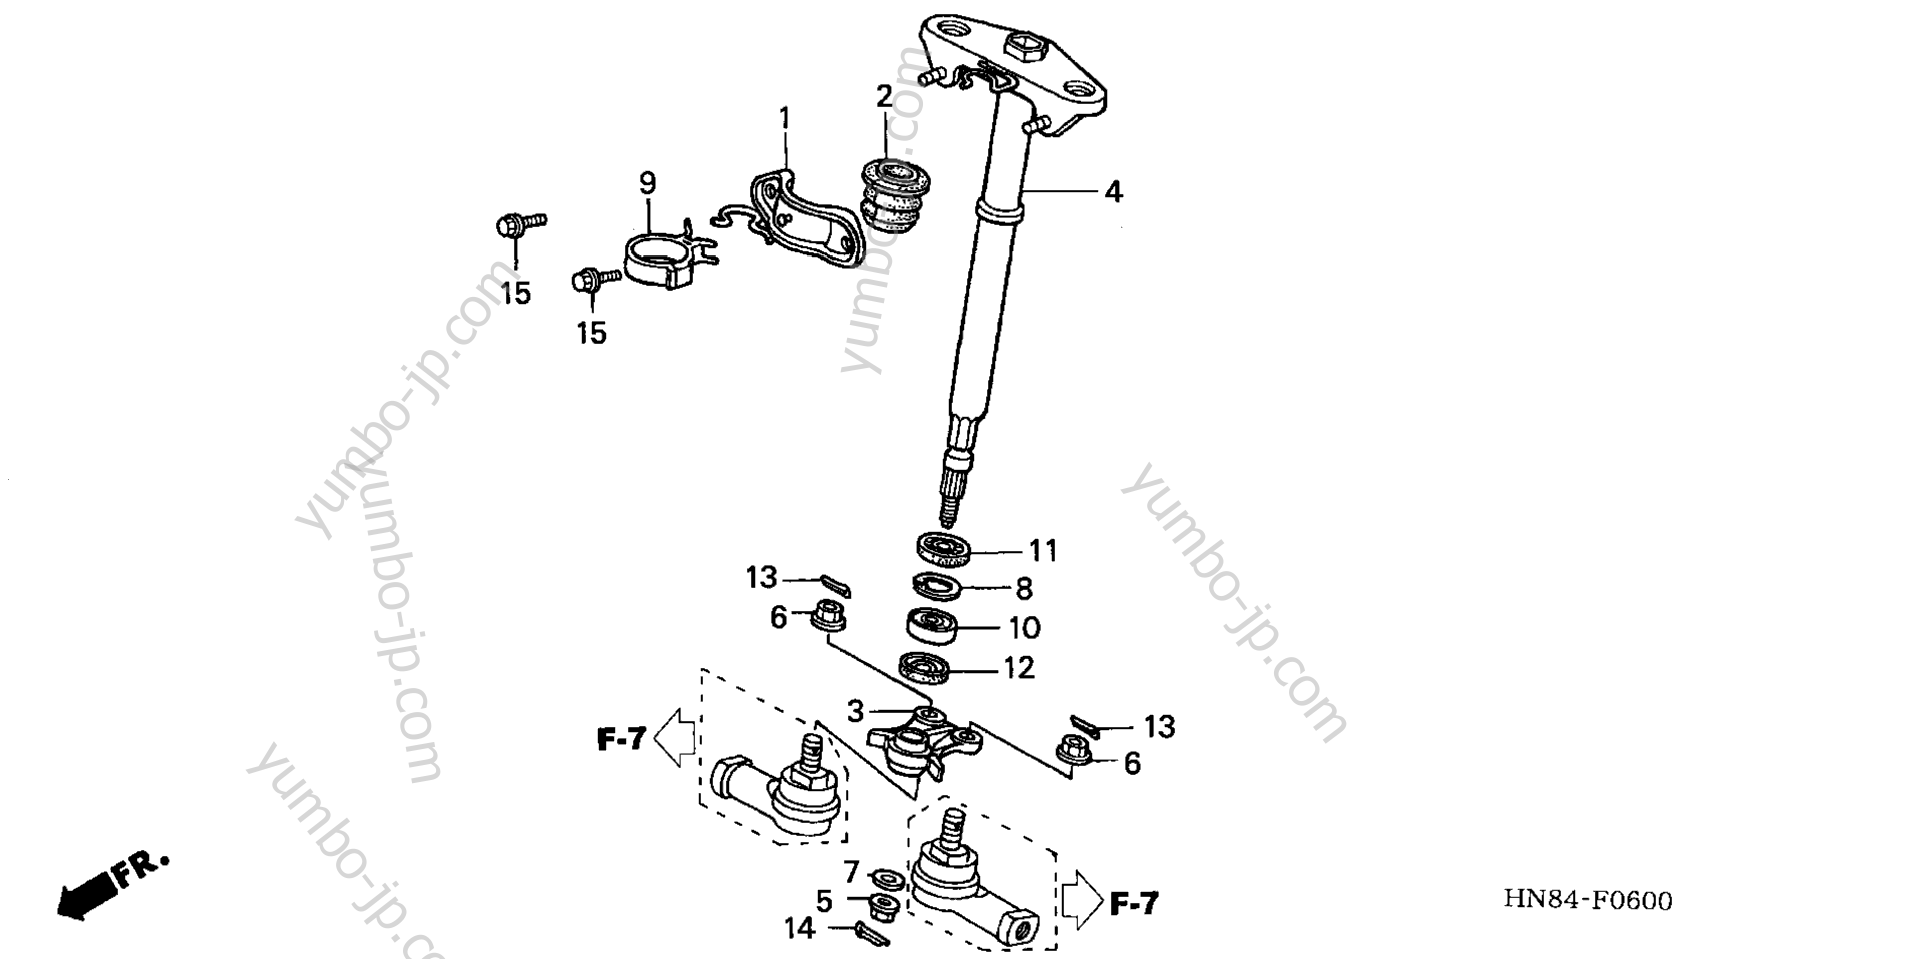 STEERING SHAFT for ATVs HONDA TRX650FA A 2005 year